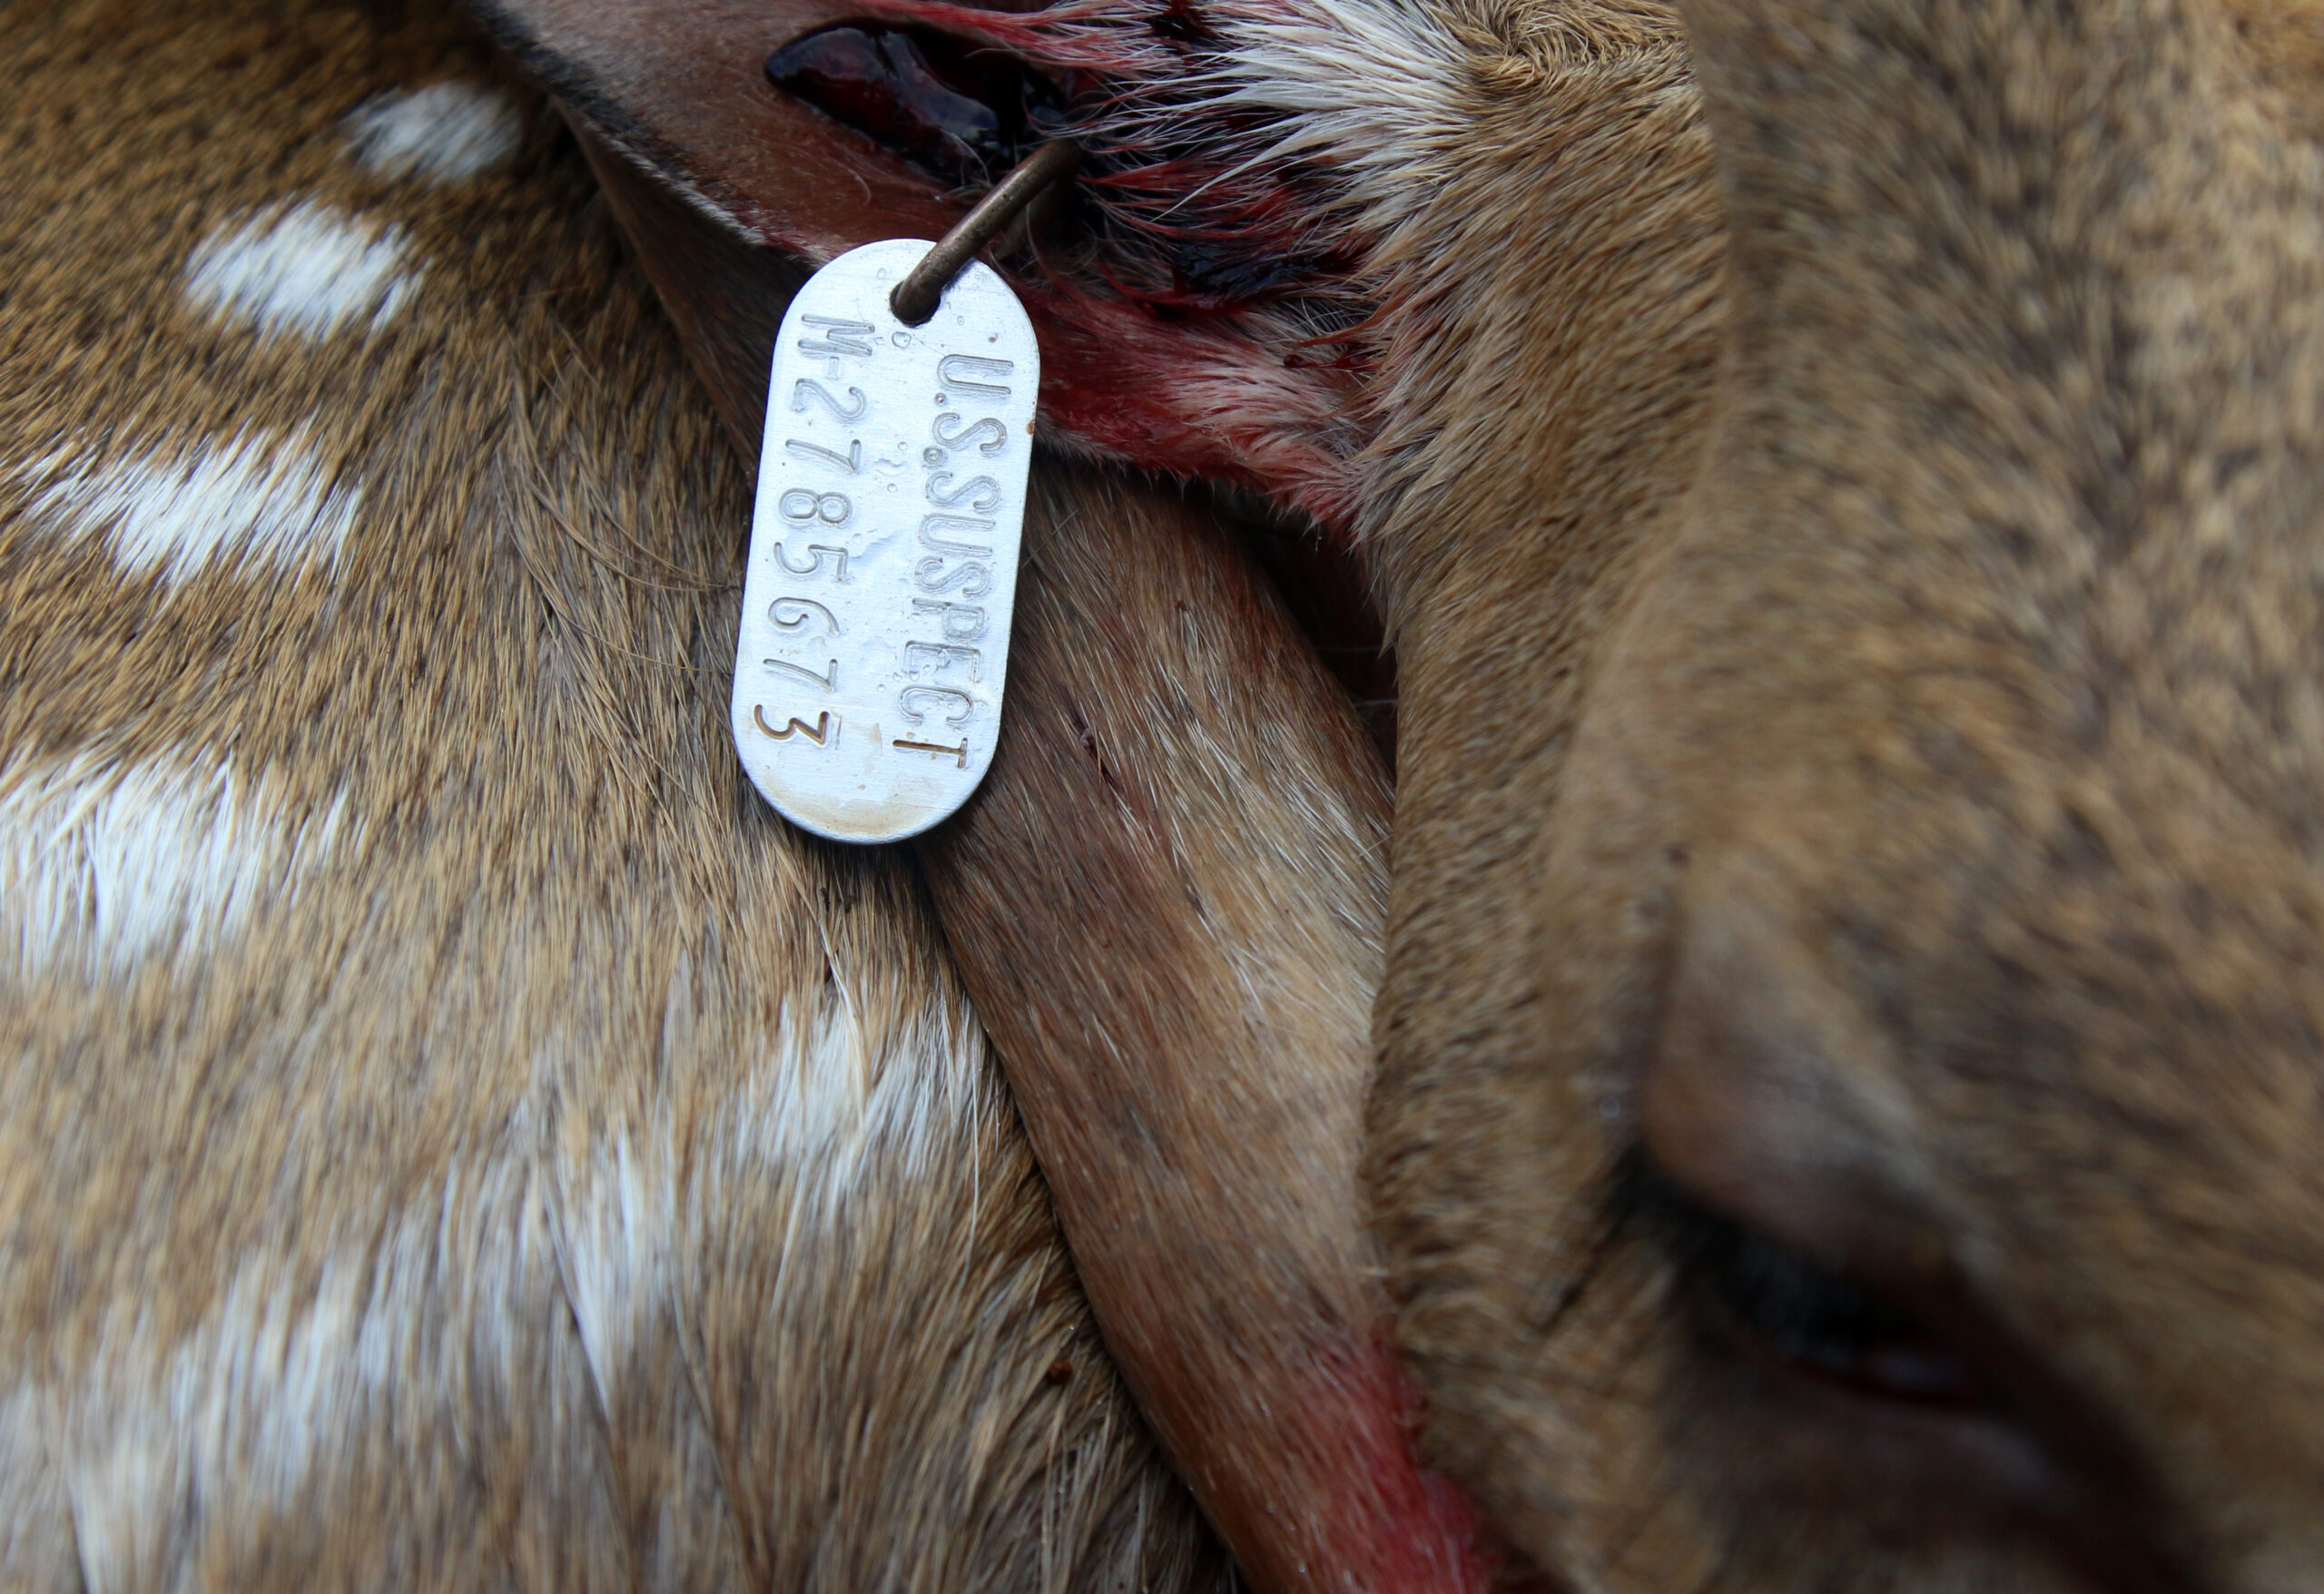 An ear tag on an axis deer intended for processing and USDA inspection as part of regulated market hunting.